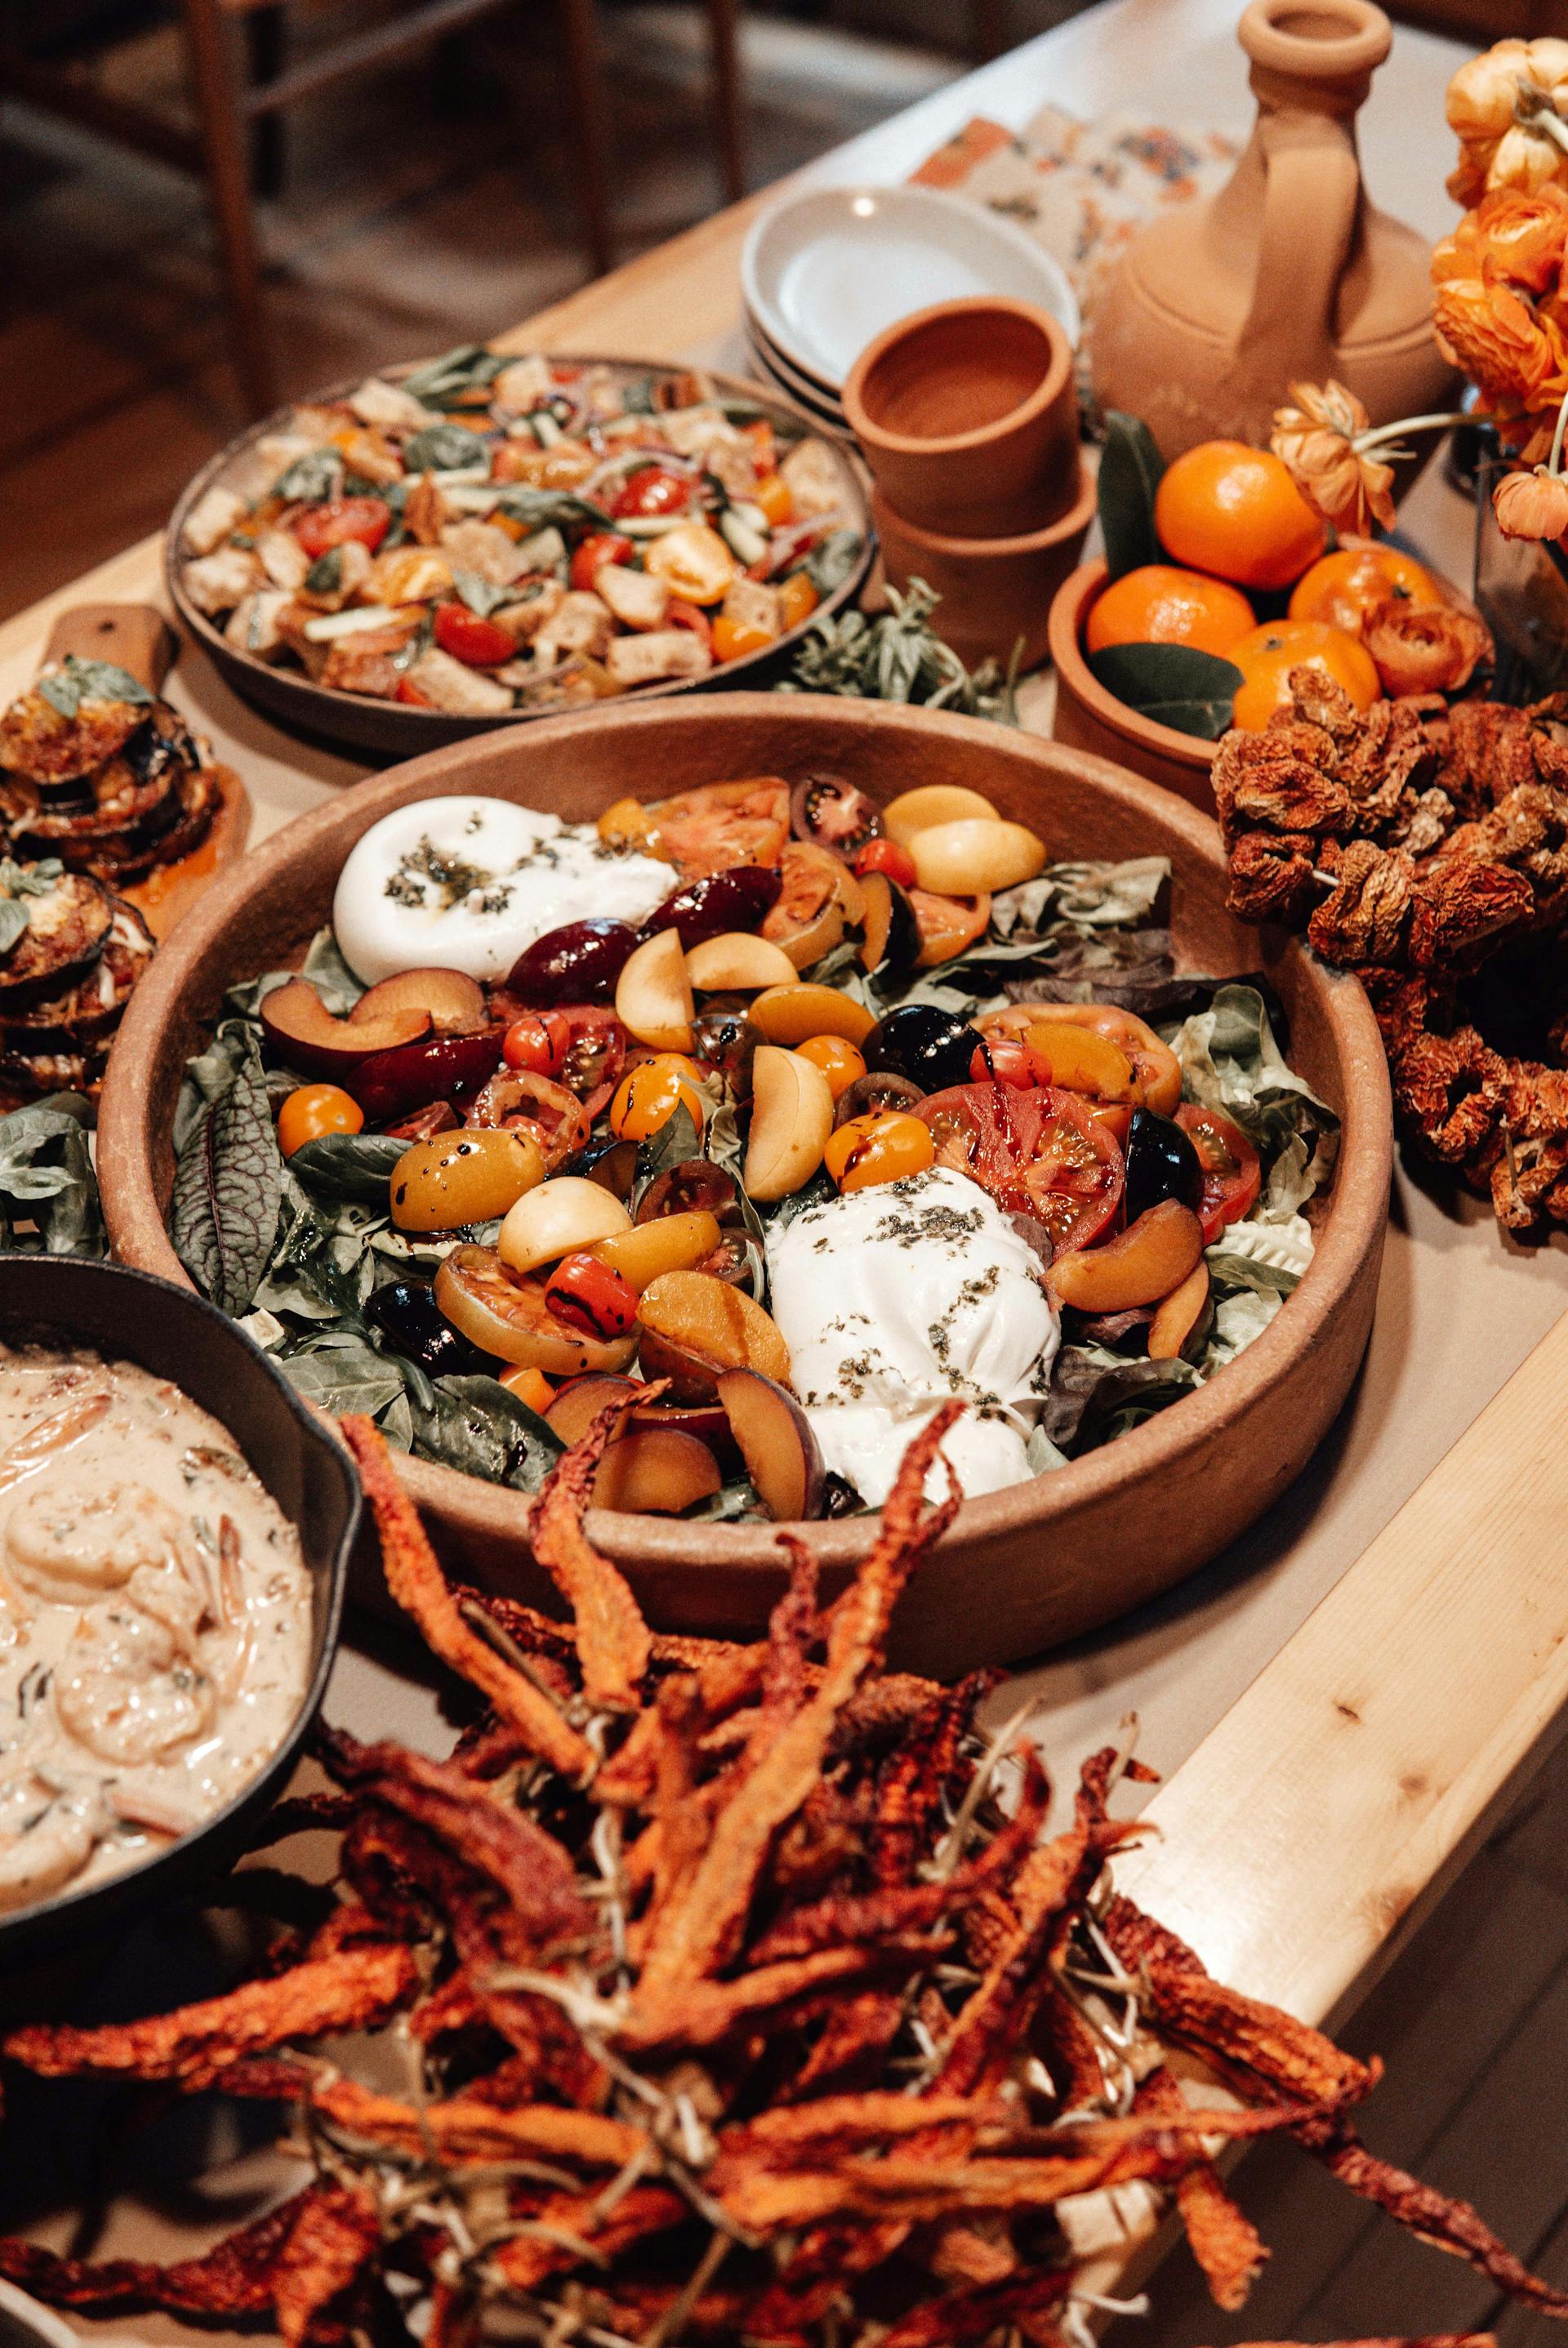 A table full of food | Source: Pexels